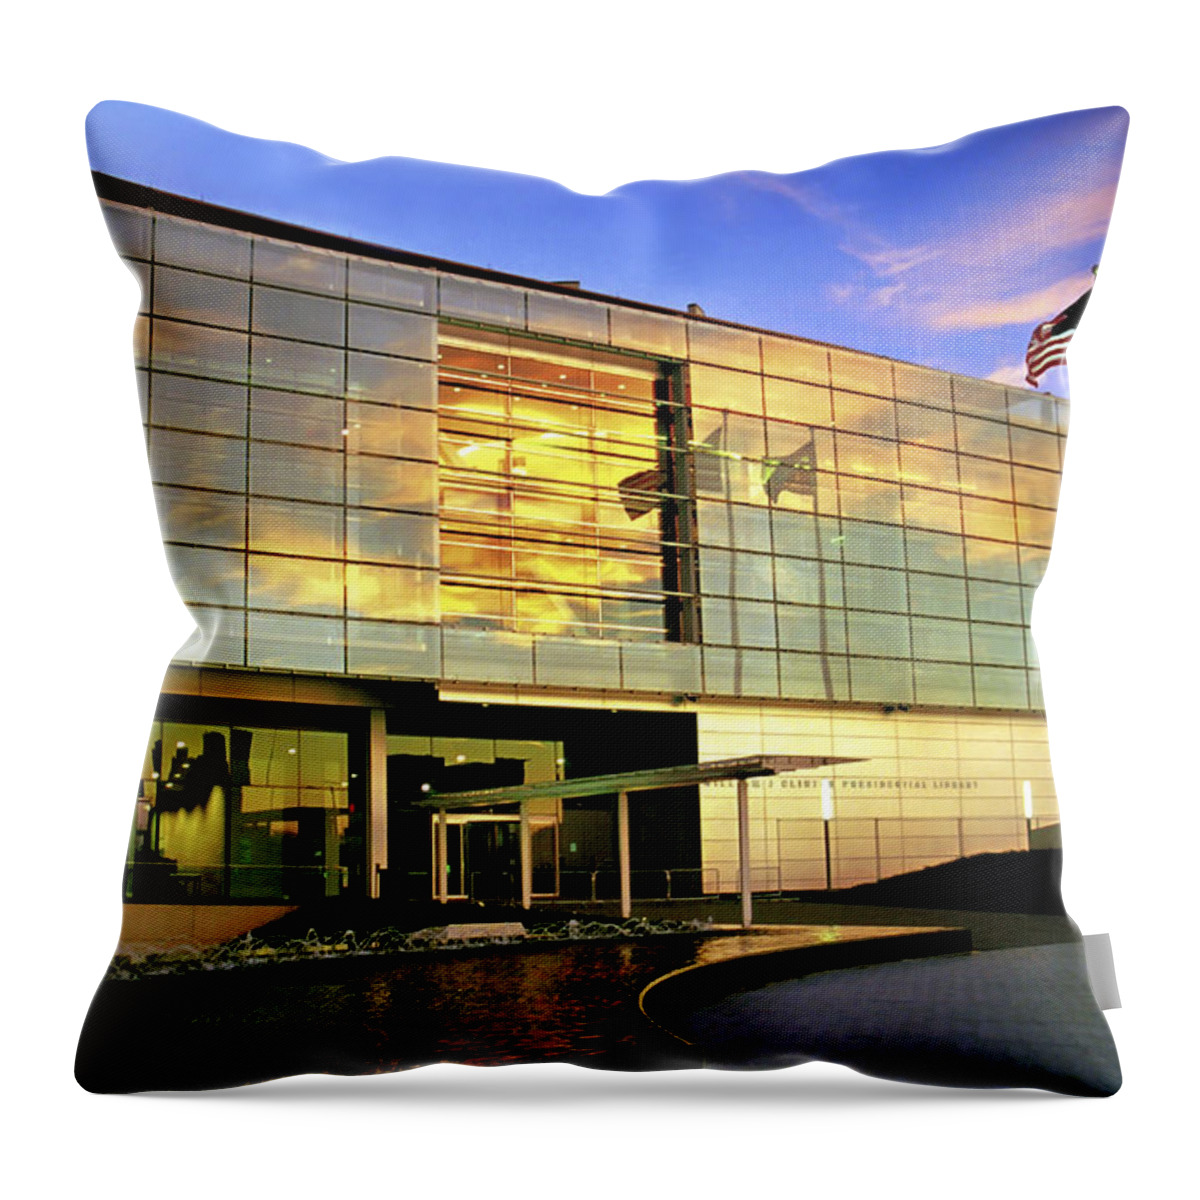 William Throw Pillow featuring the photograph William Jefferson Clinton Presidential Library by Jason Politte